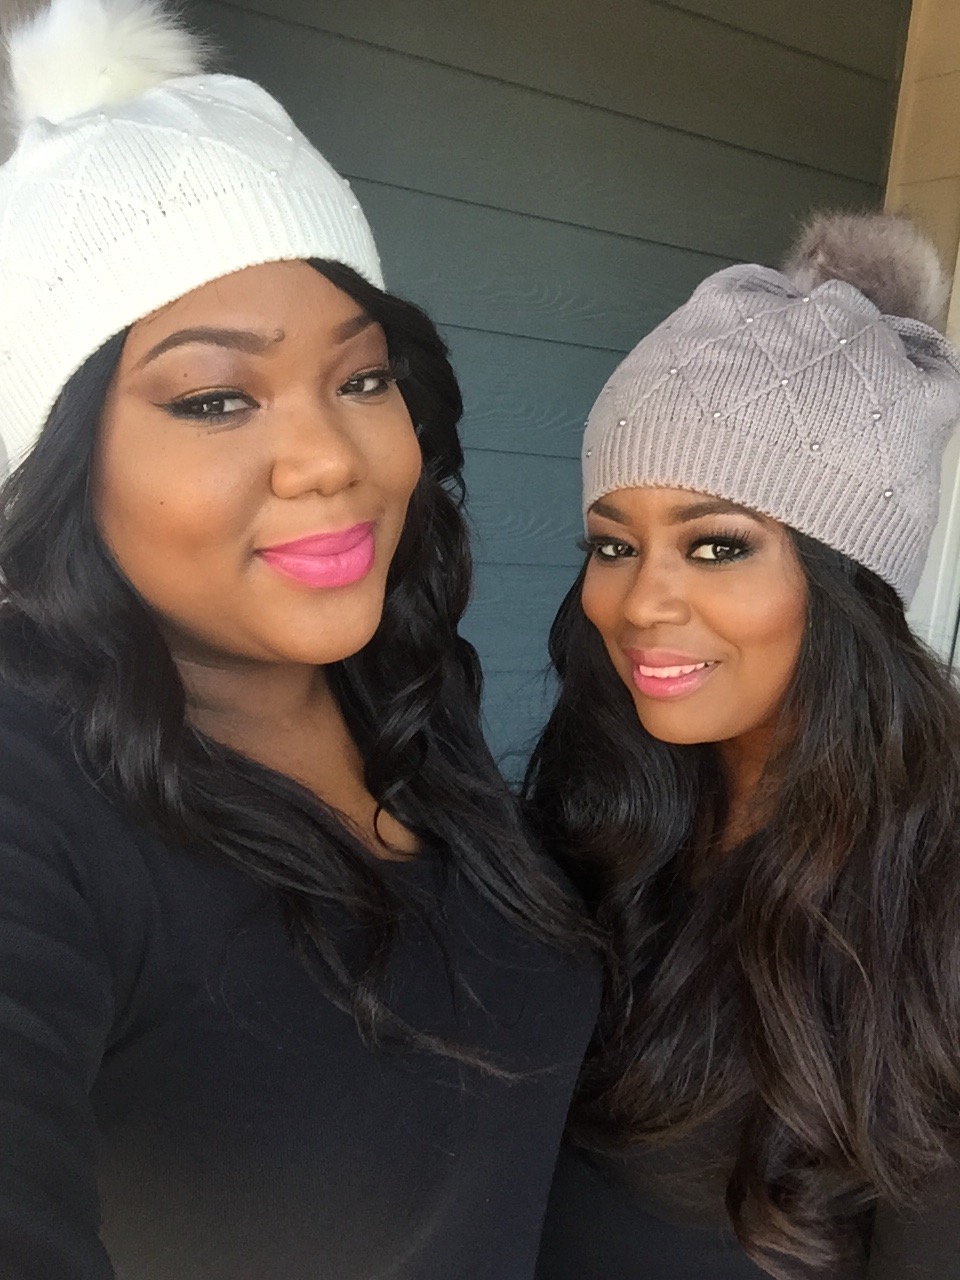 Get The Look: Pink Lips For The Holiday!